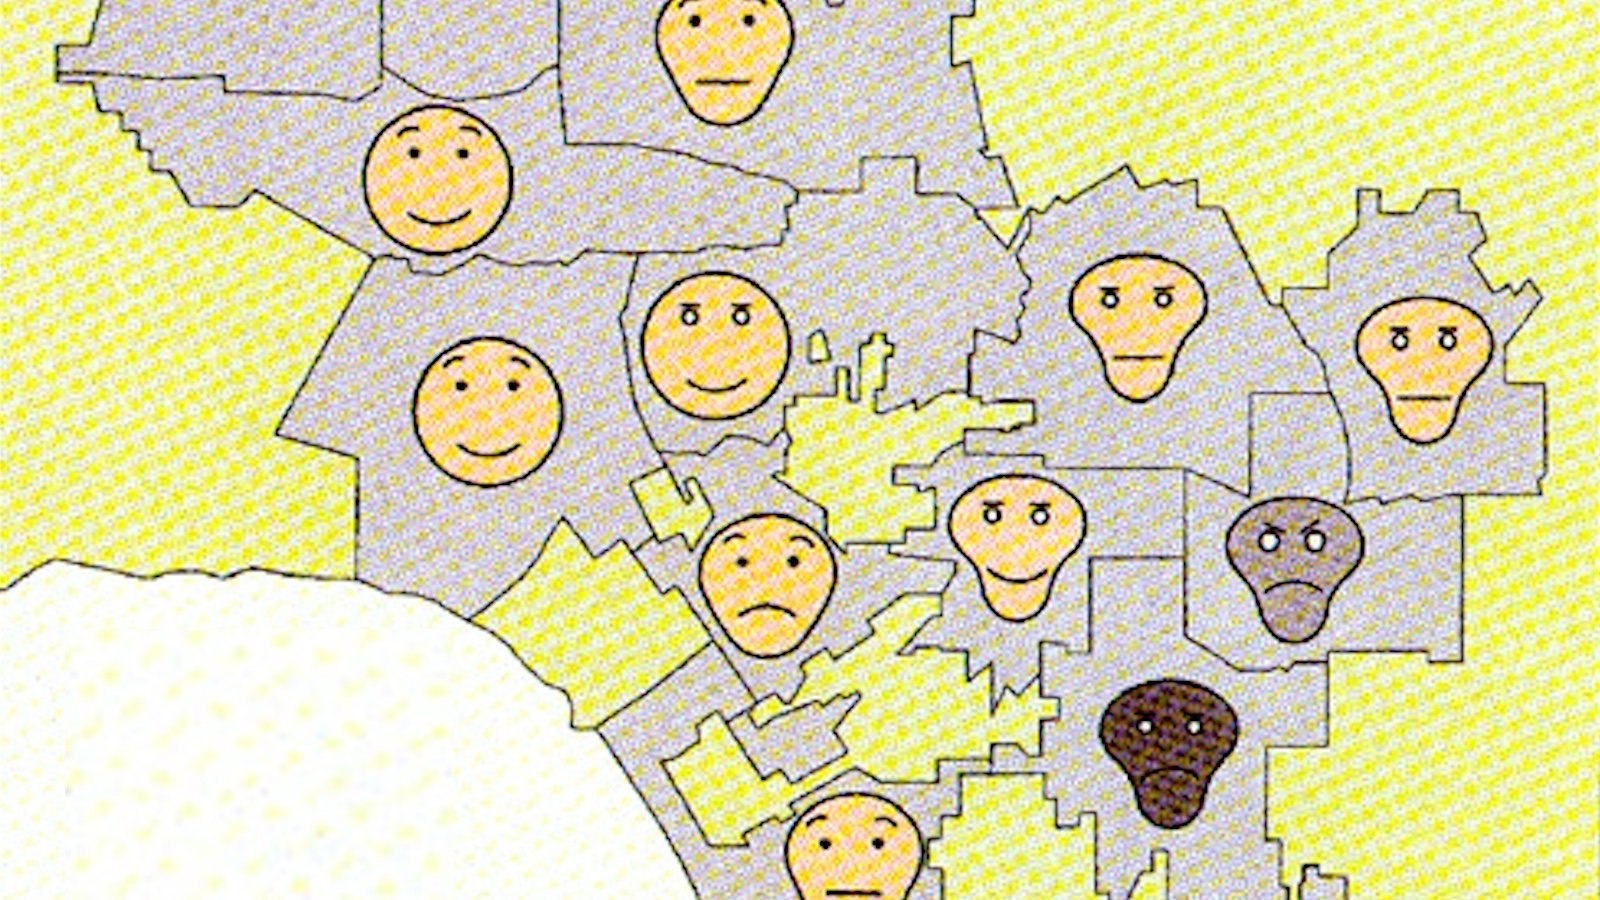 A map with various yellow and brown faces showing different emotions, representing different regions.